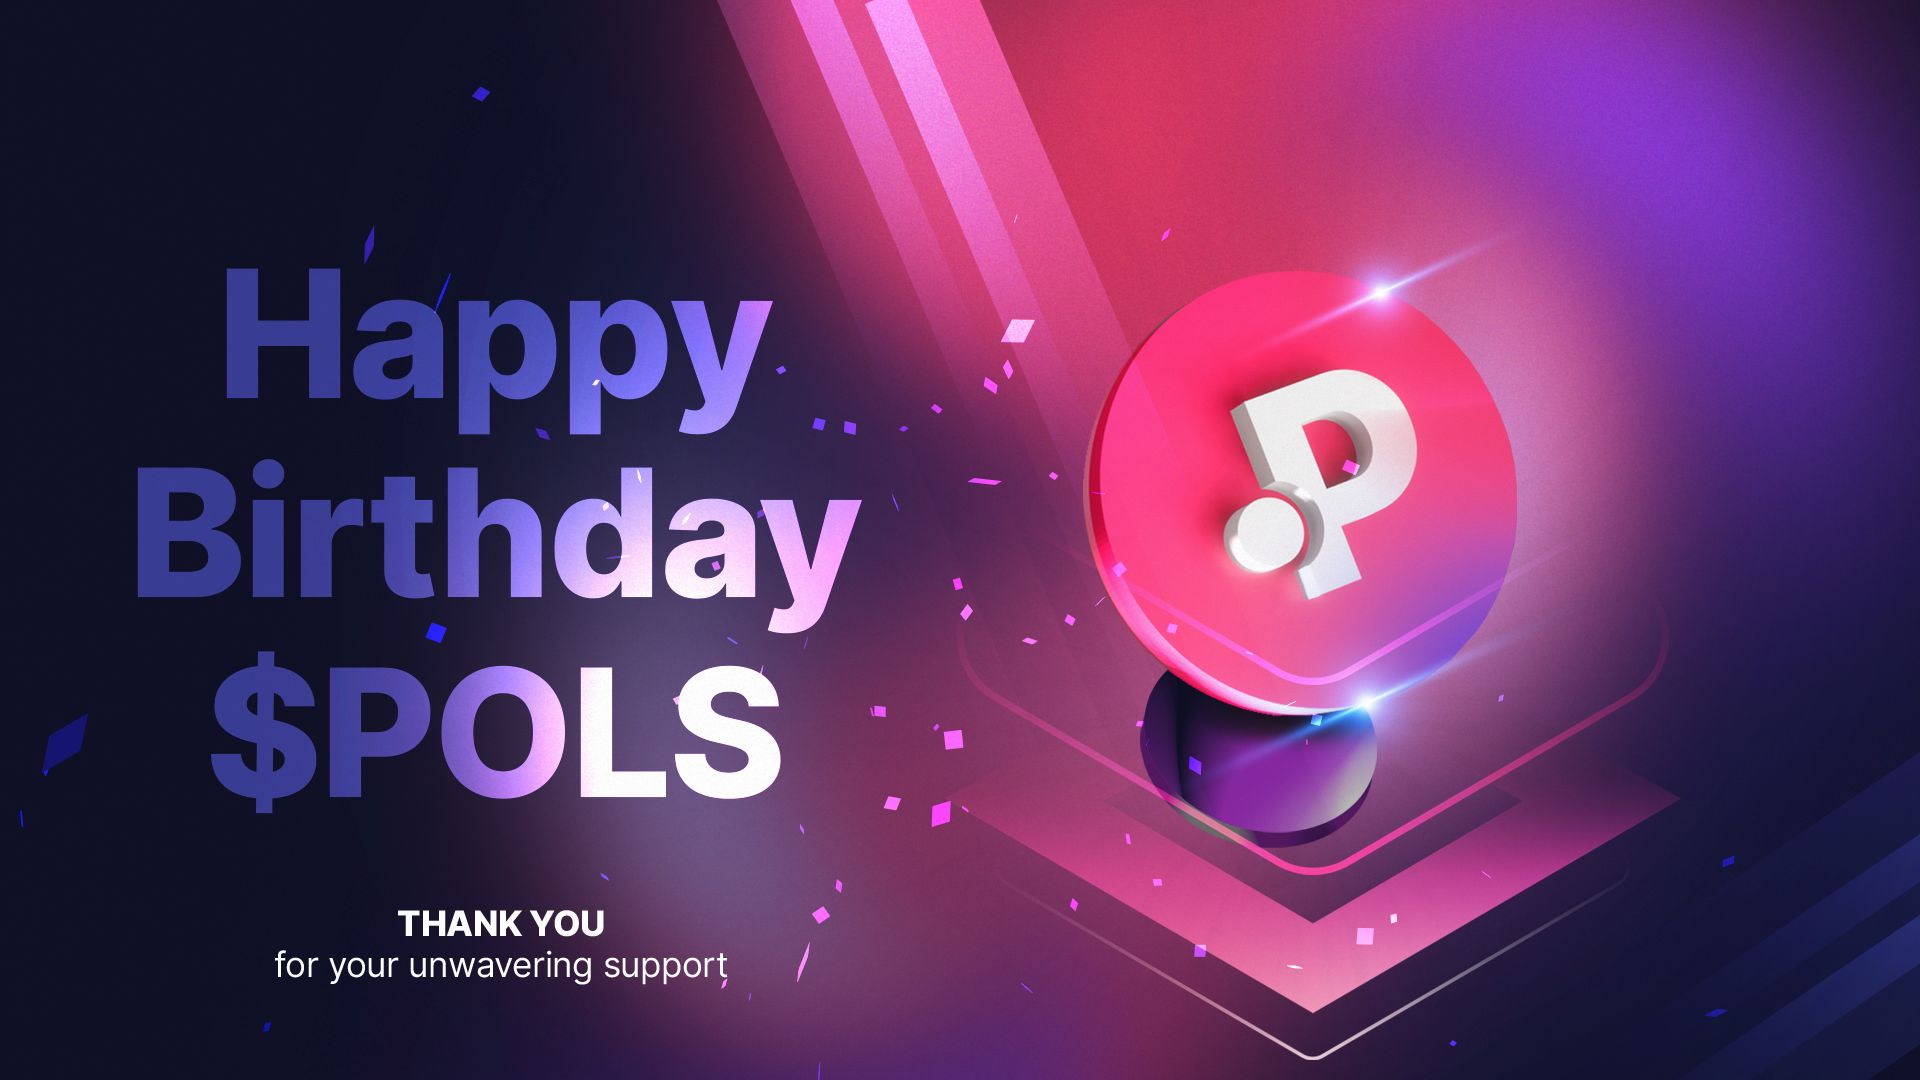 POLS Turns 2! A Letter From Our Co-Founder